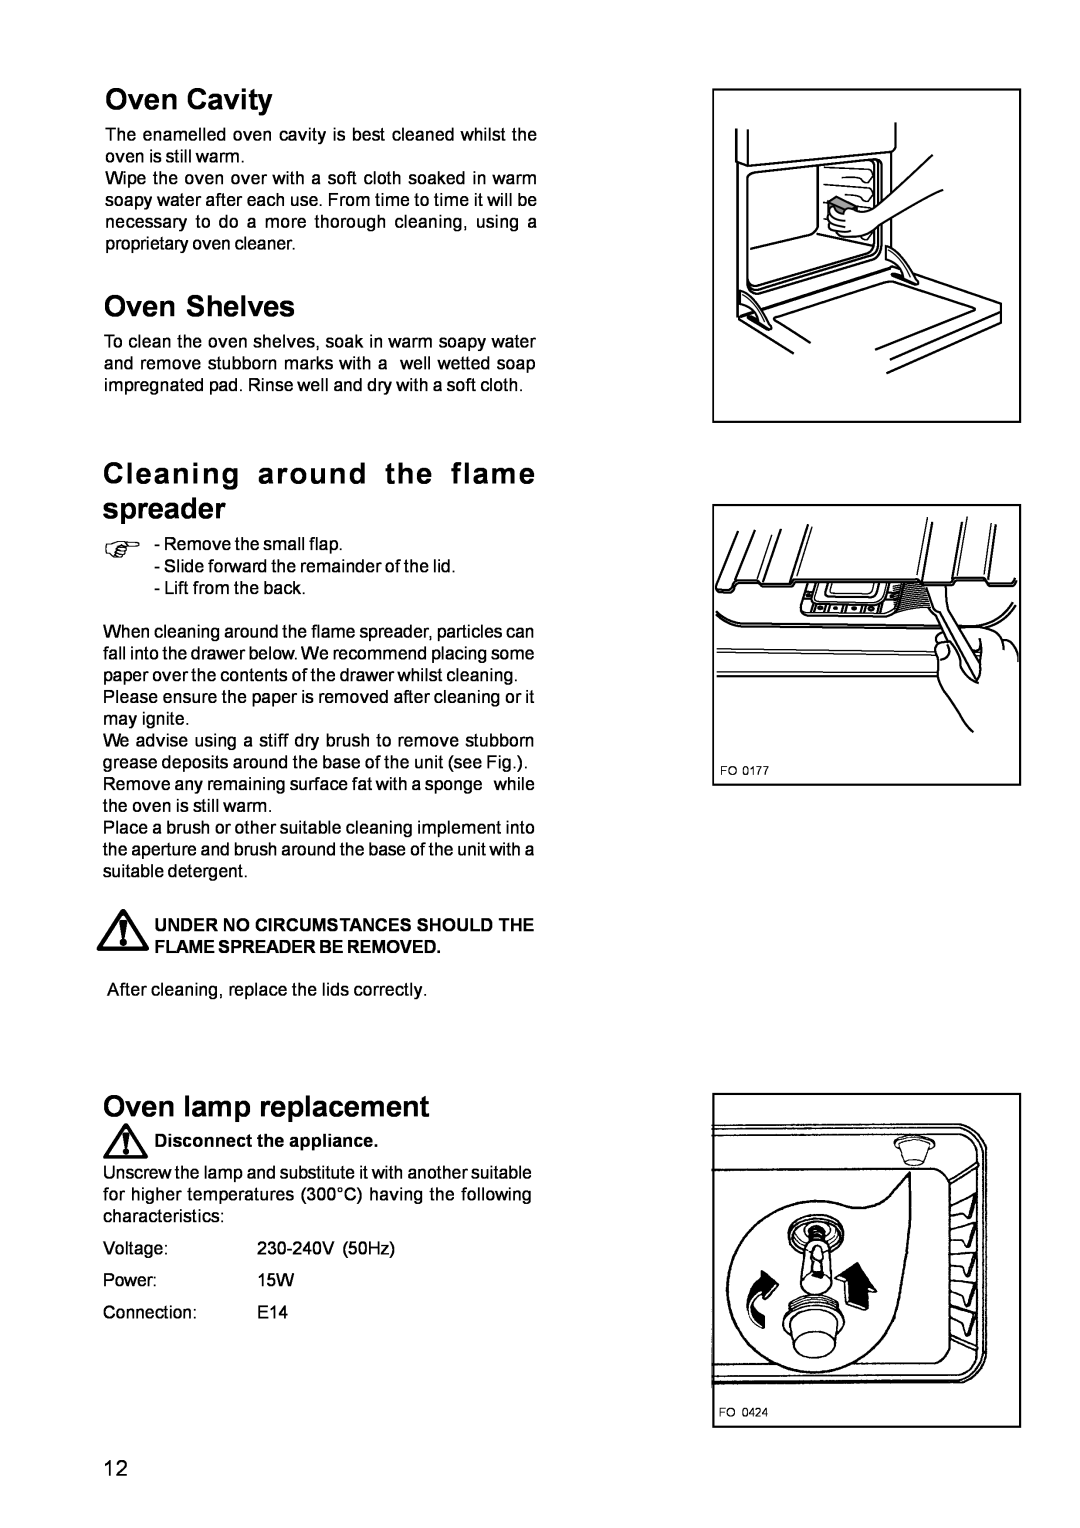 Electrolux CSIG 509 manual Oven Cavity, Oven Shelves, Cleaning around the flame spreader, Oven lamp replacement 